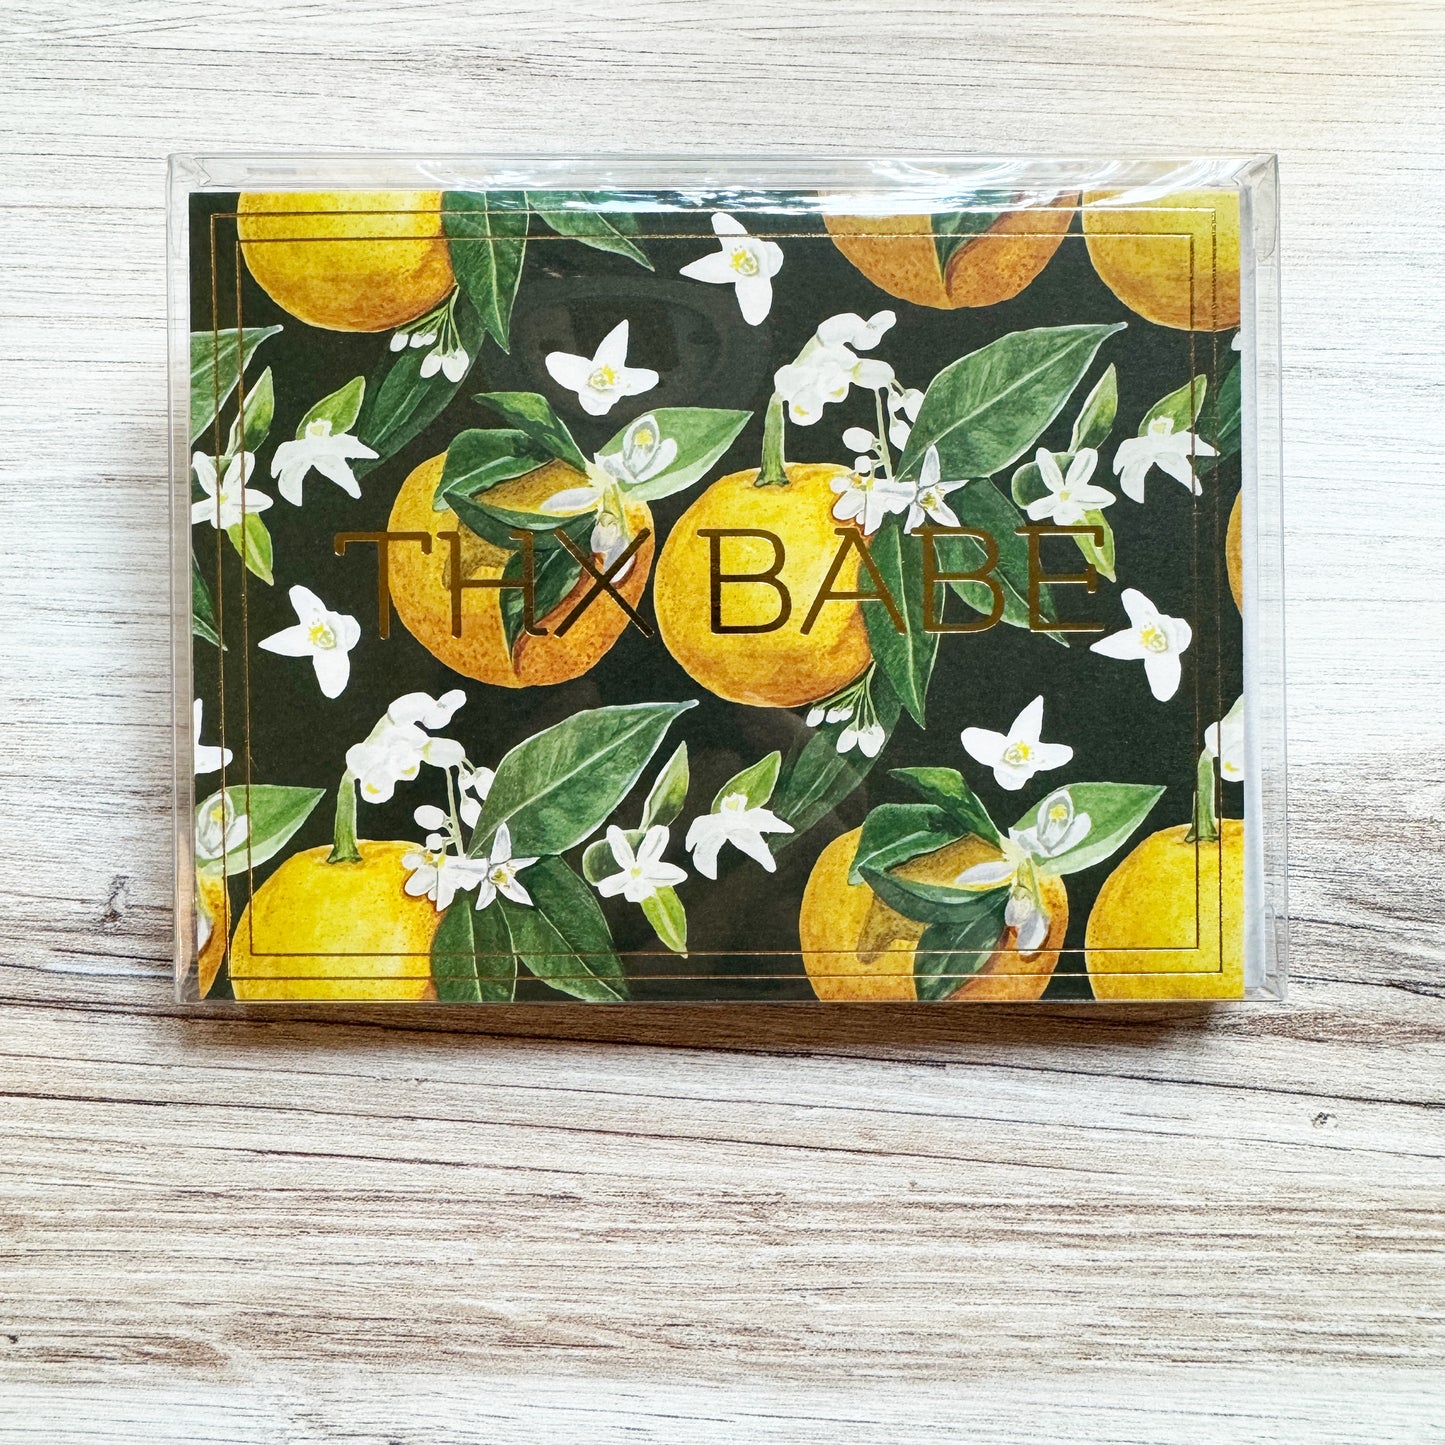 Set of 6 folded full color gold foil stamped cards with dark green background and watercolor painted orange blossom flowers and oranges in foreground, blank inside. 6 luxe gray envelopes.